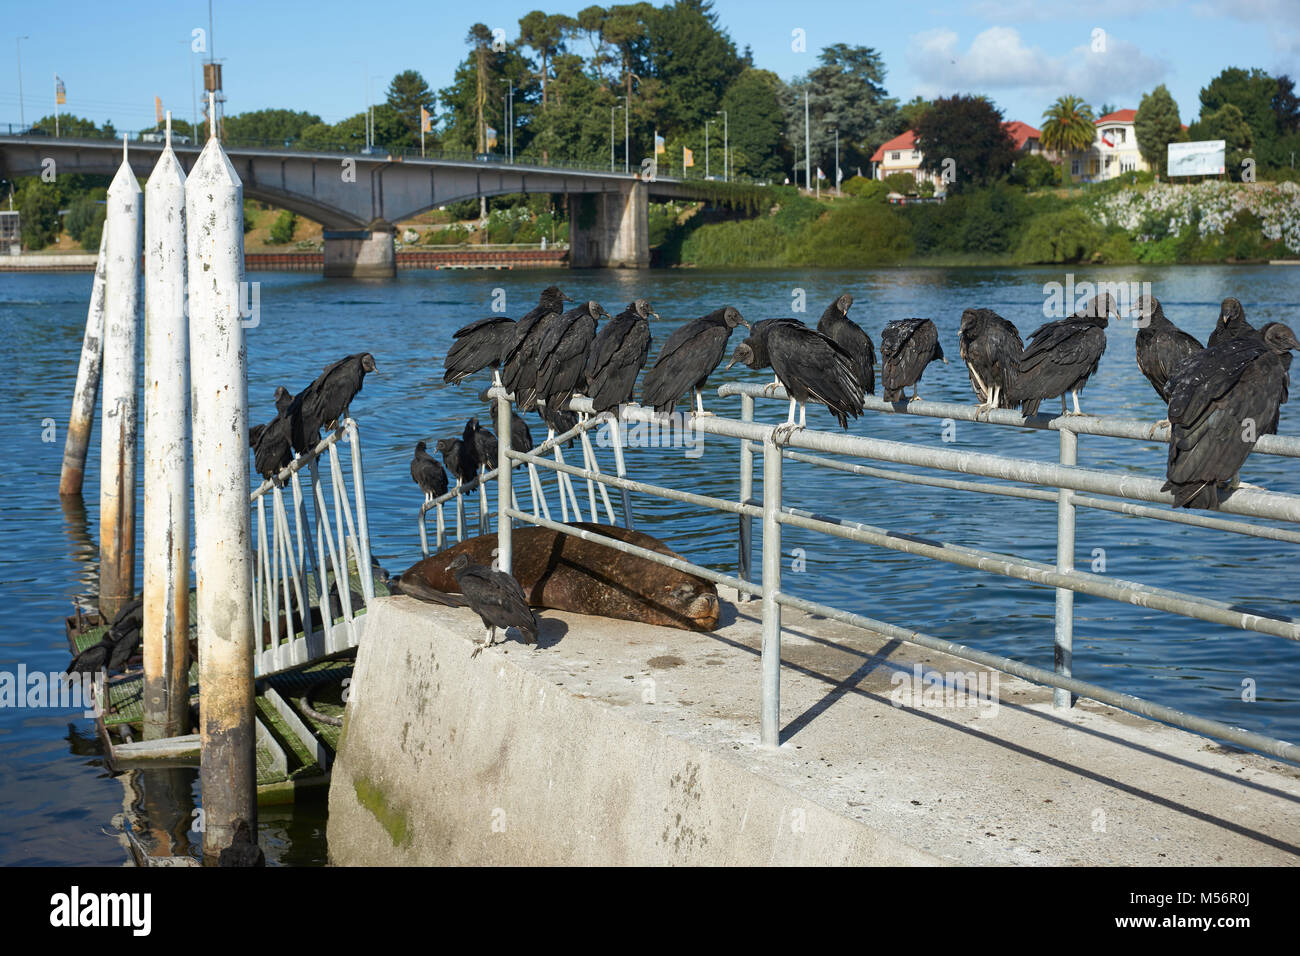 Black Vultures (Coragyps atratus) perched on railings above Southern Sea Lions (Otaria flavescens) on a pier on the waterfront of Valdivia, Chile Stock Photo